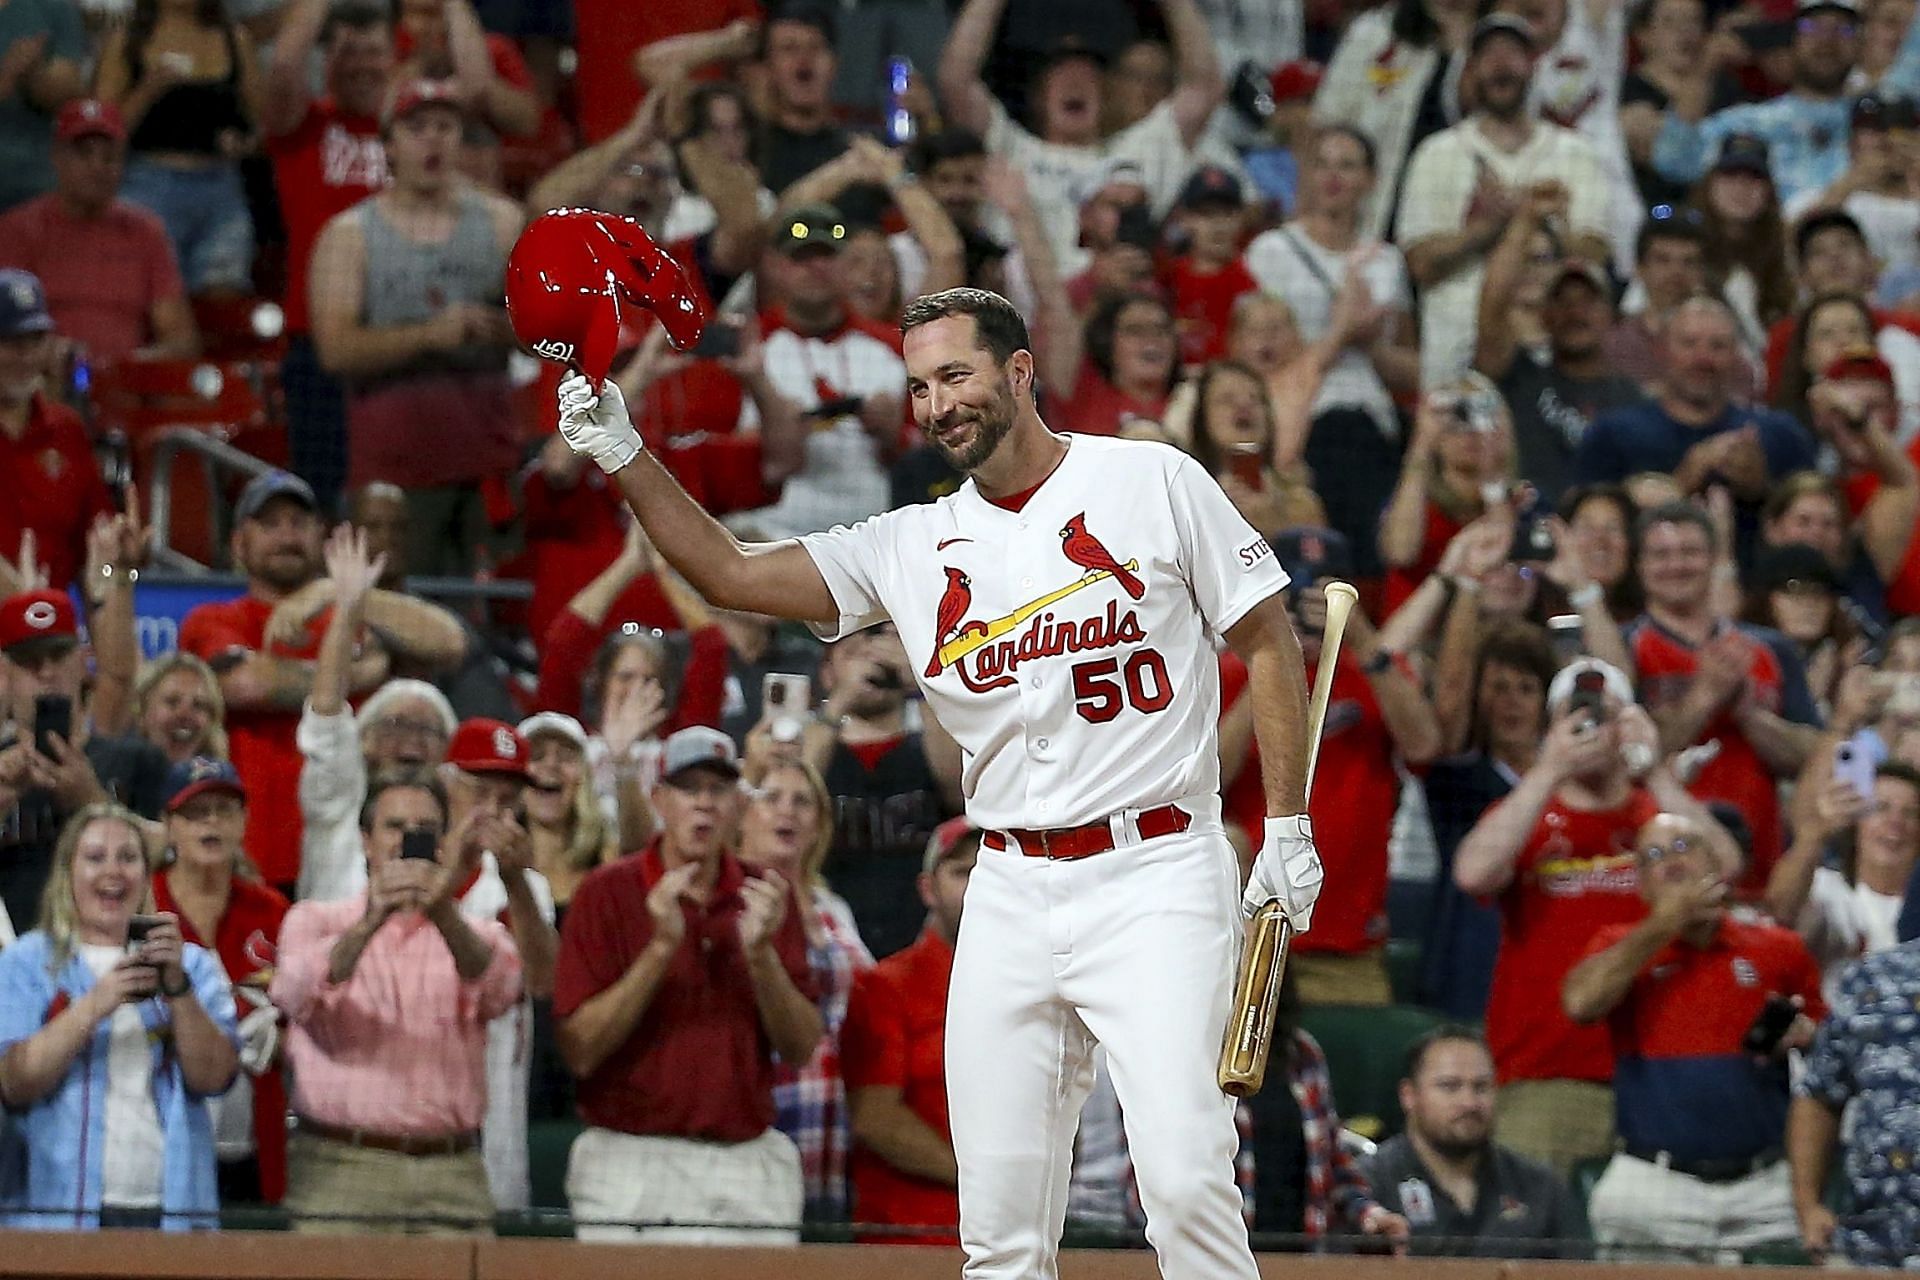 Adam Wainwright, who is bidding farewell from baseball this weekend, did indeed hit a home run in his first at-bat as a rookie in 2006.